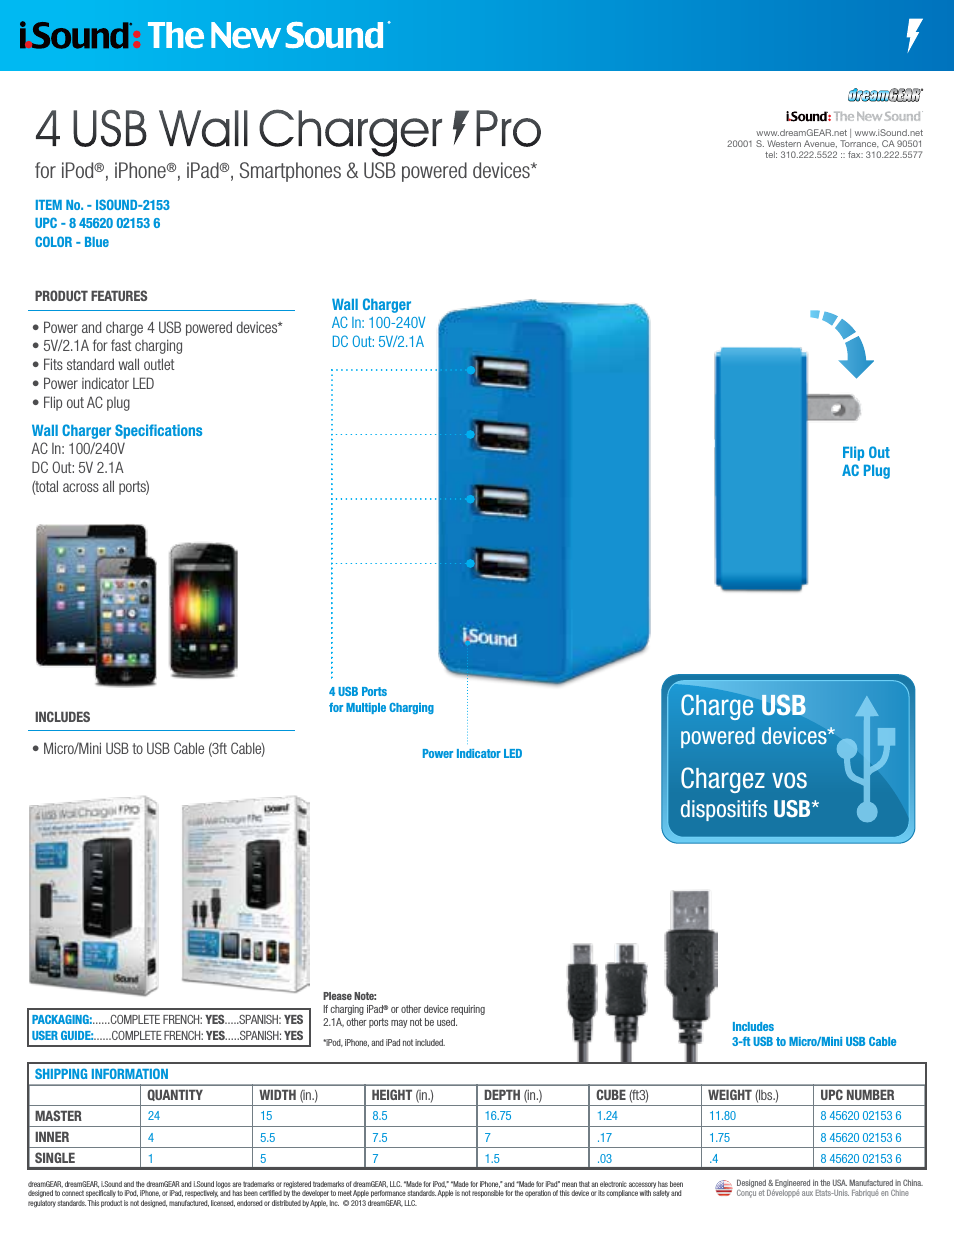 4 USB Wall Charger Pro 2153 - Sell Sheet